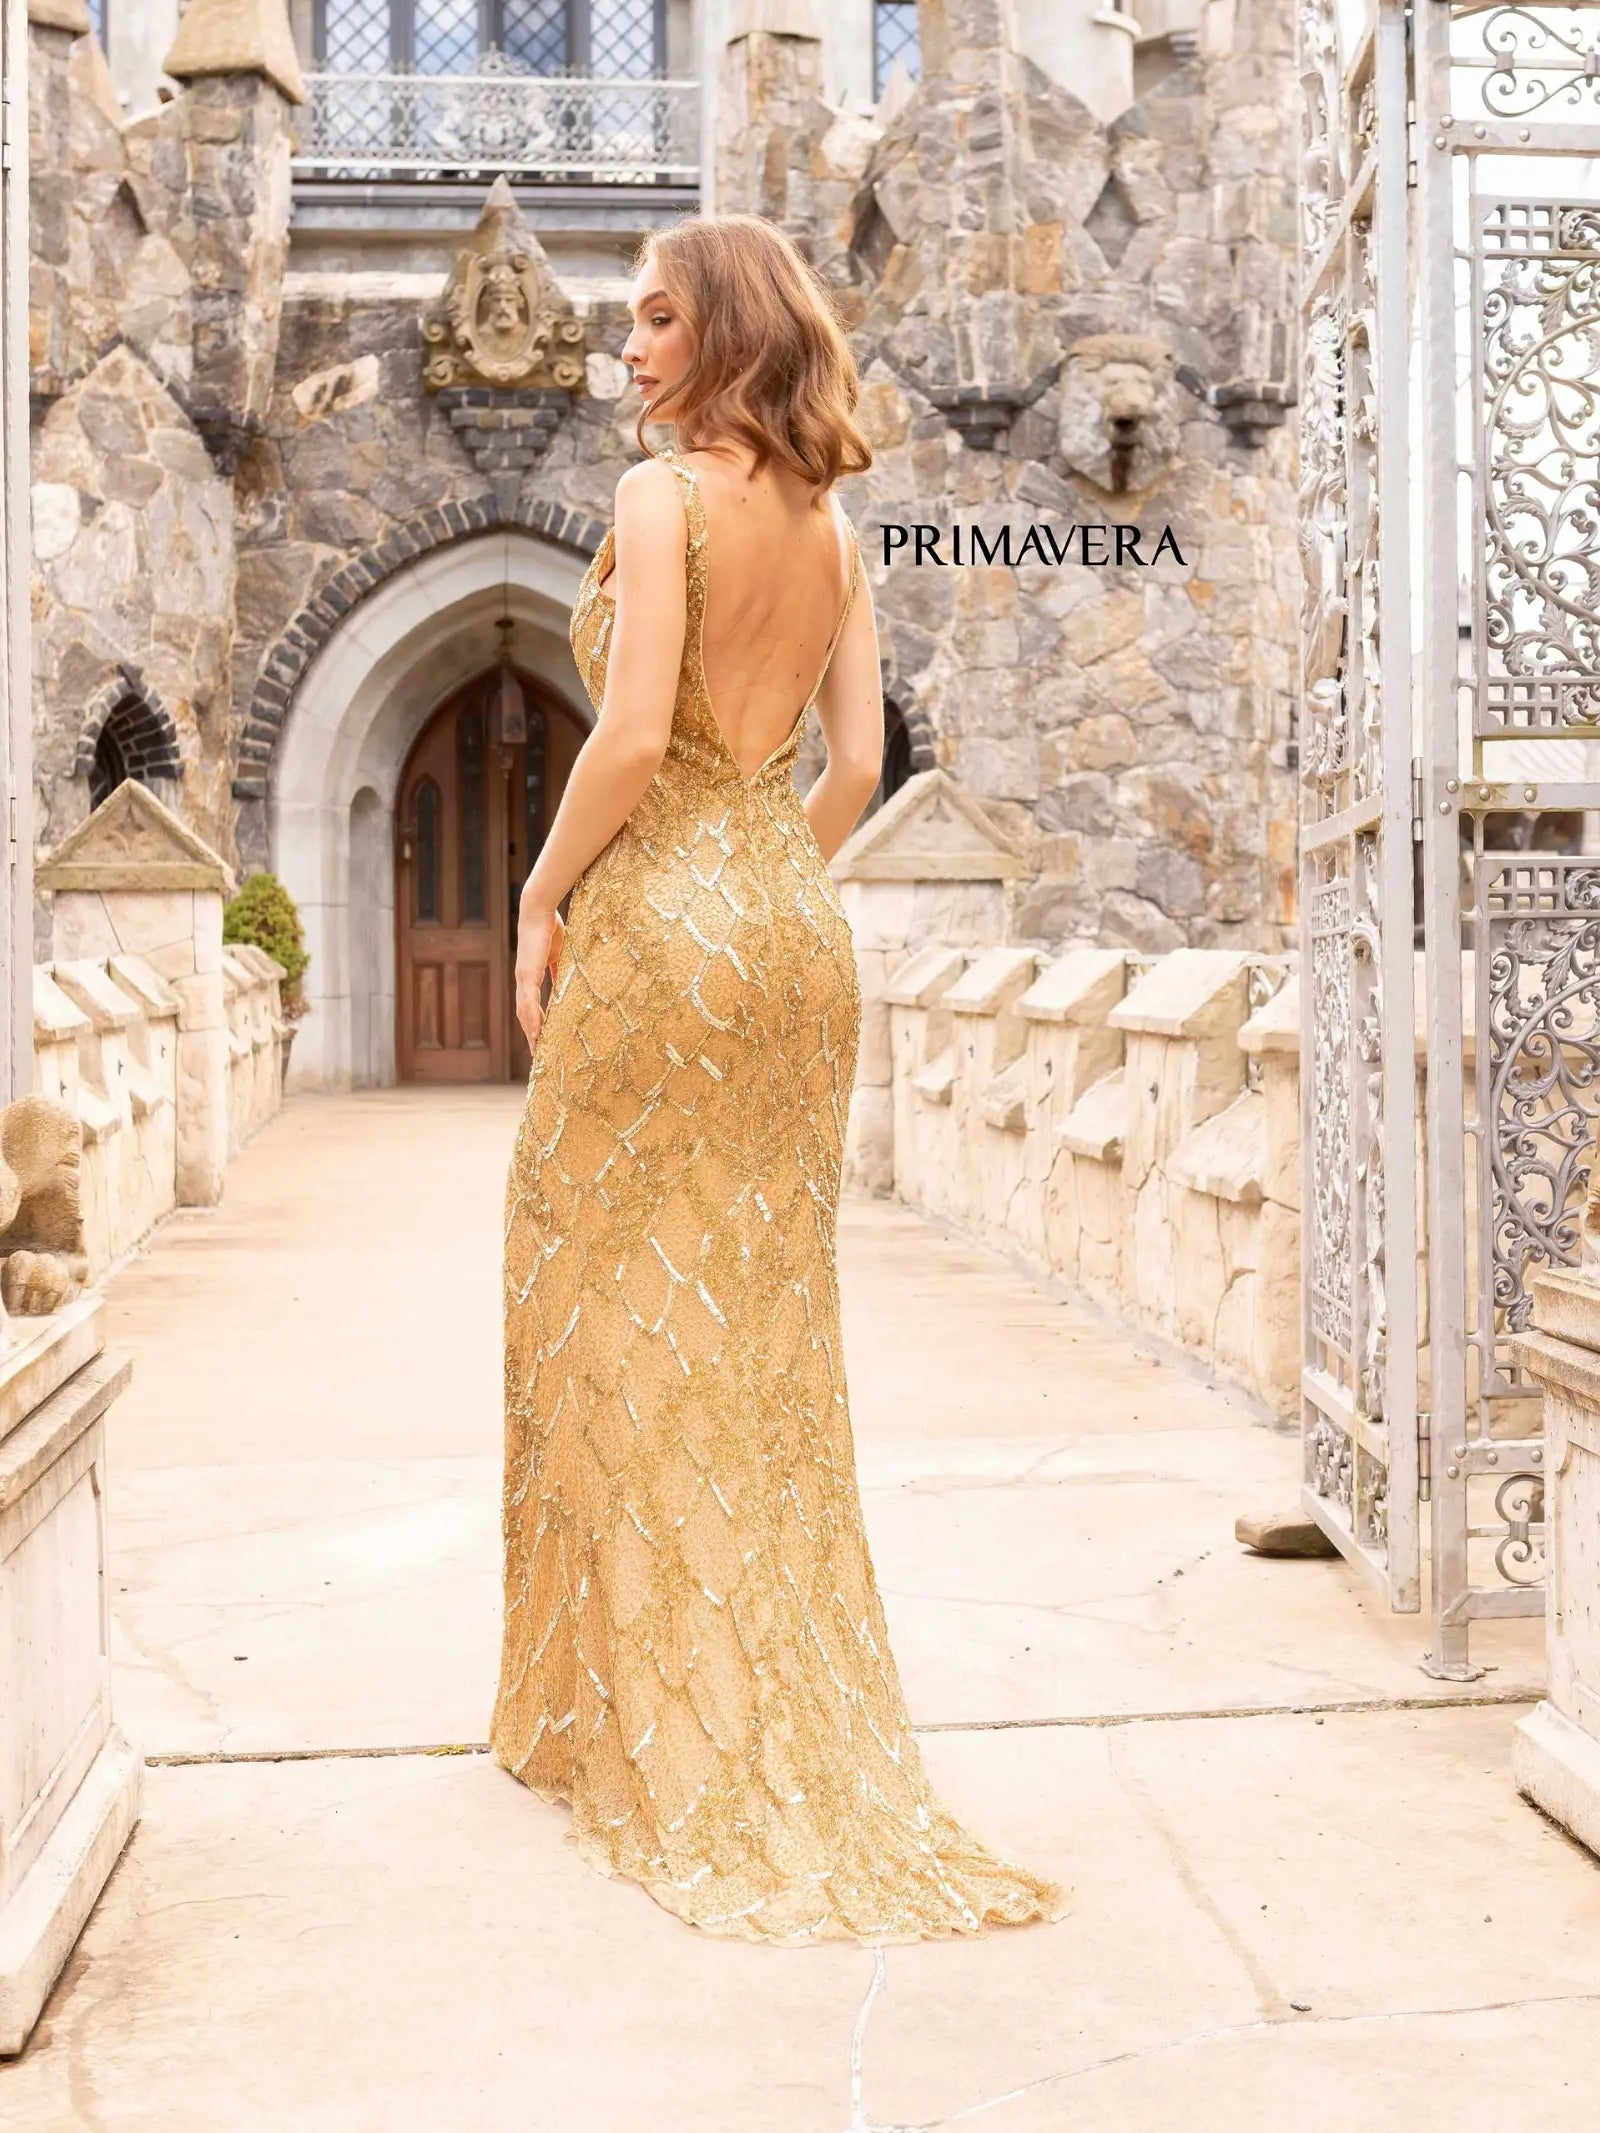 Primavera Couture 3926 Prom Dress Long Beaded Gown. This Gown has such a gorgeous slit. 